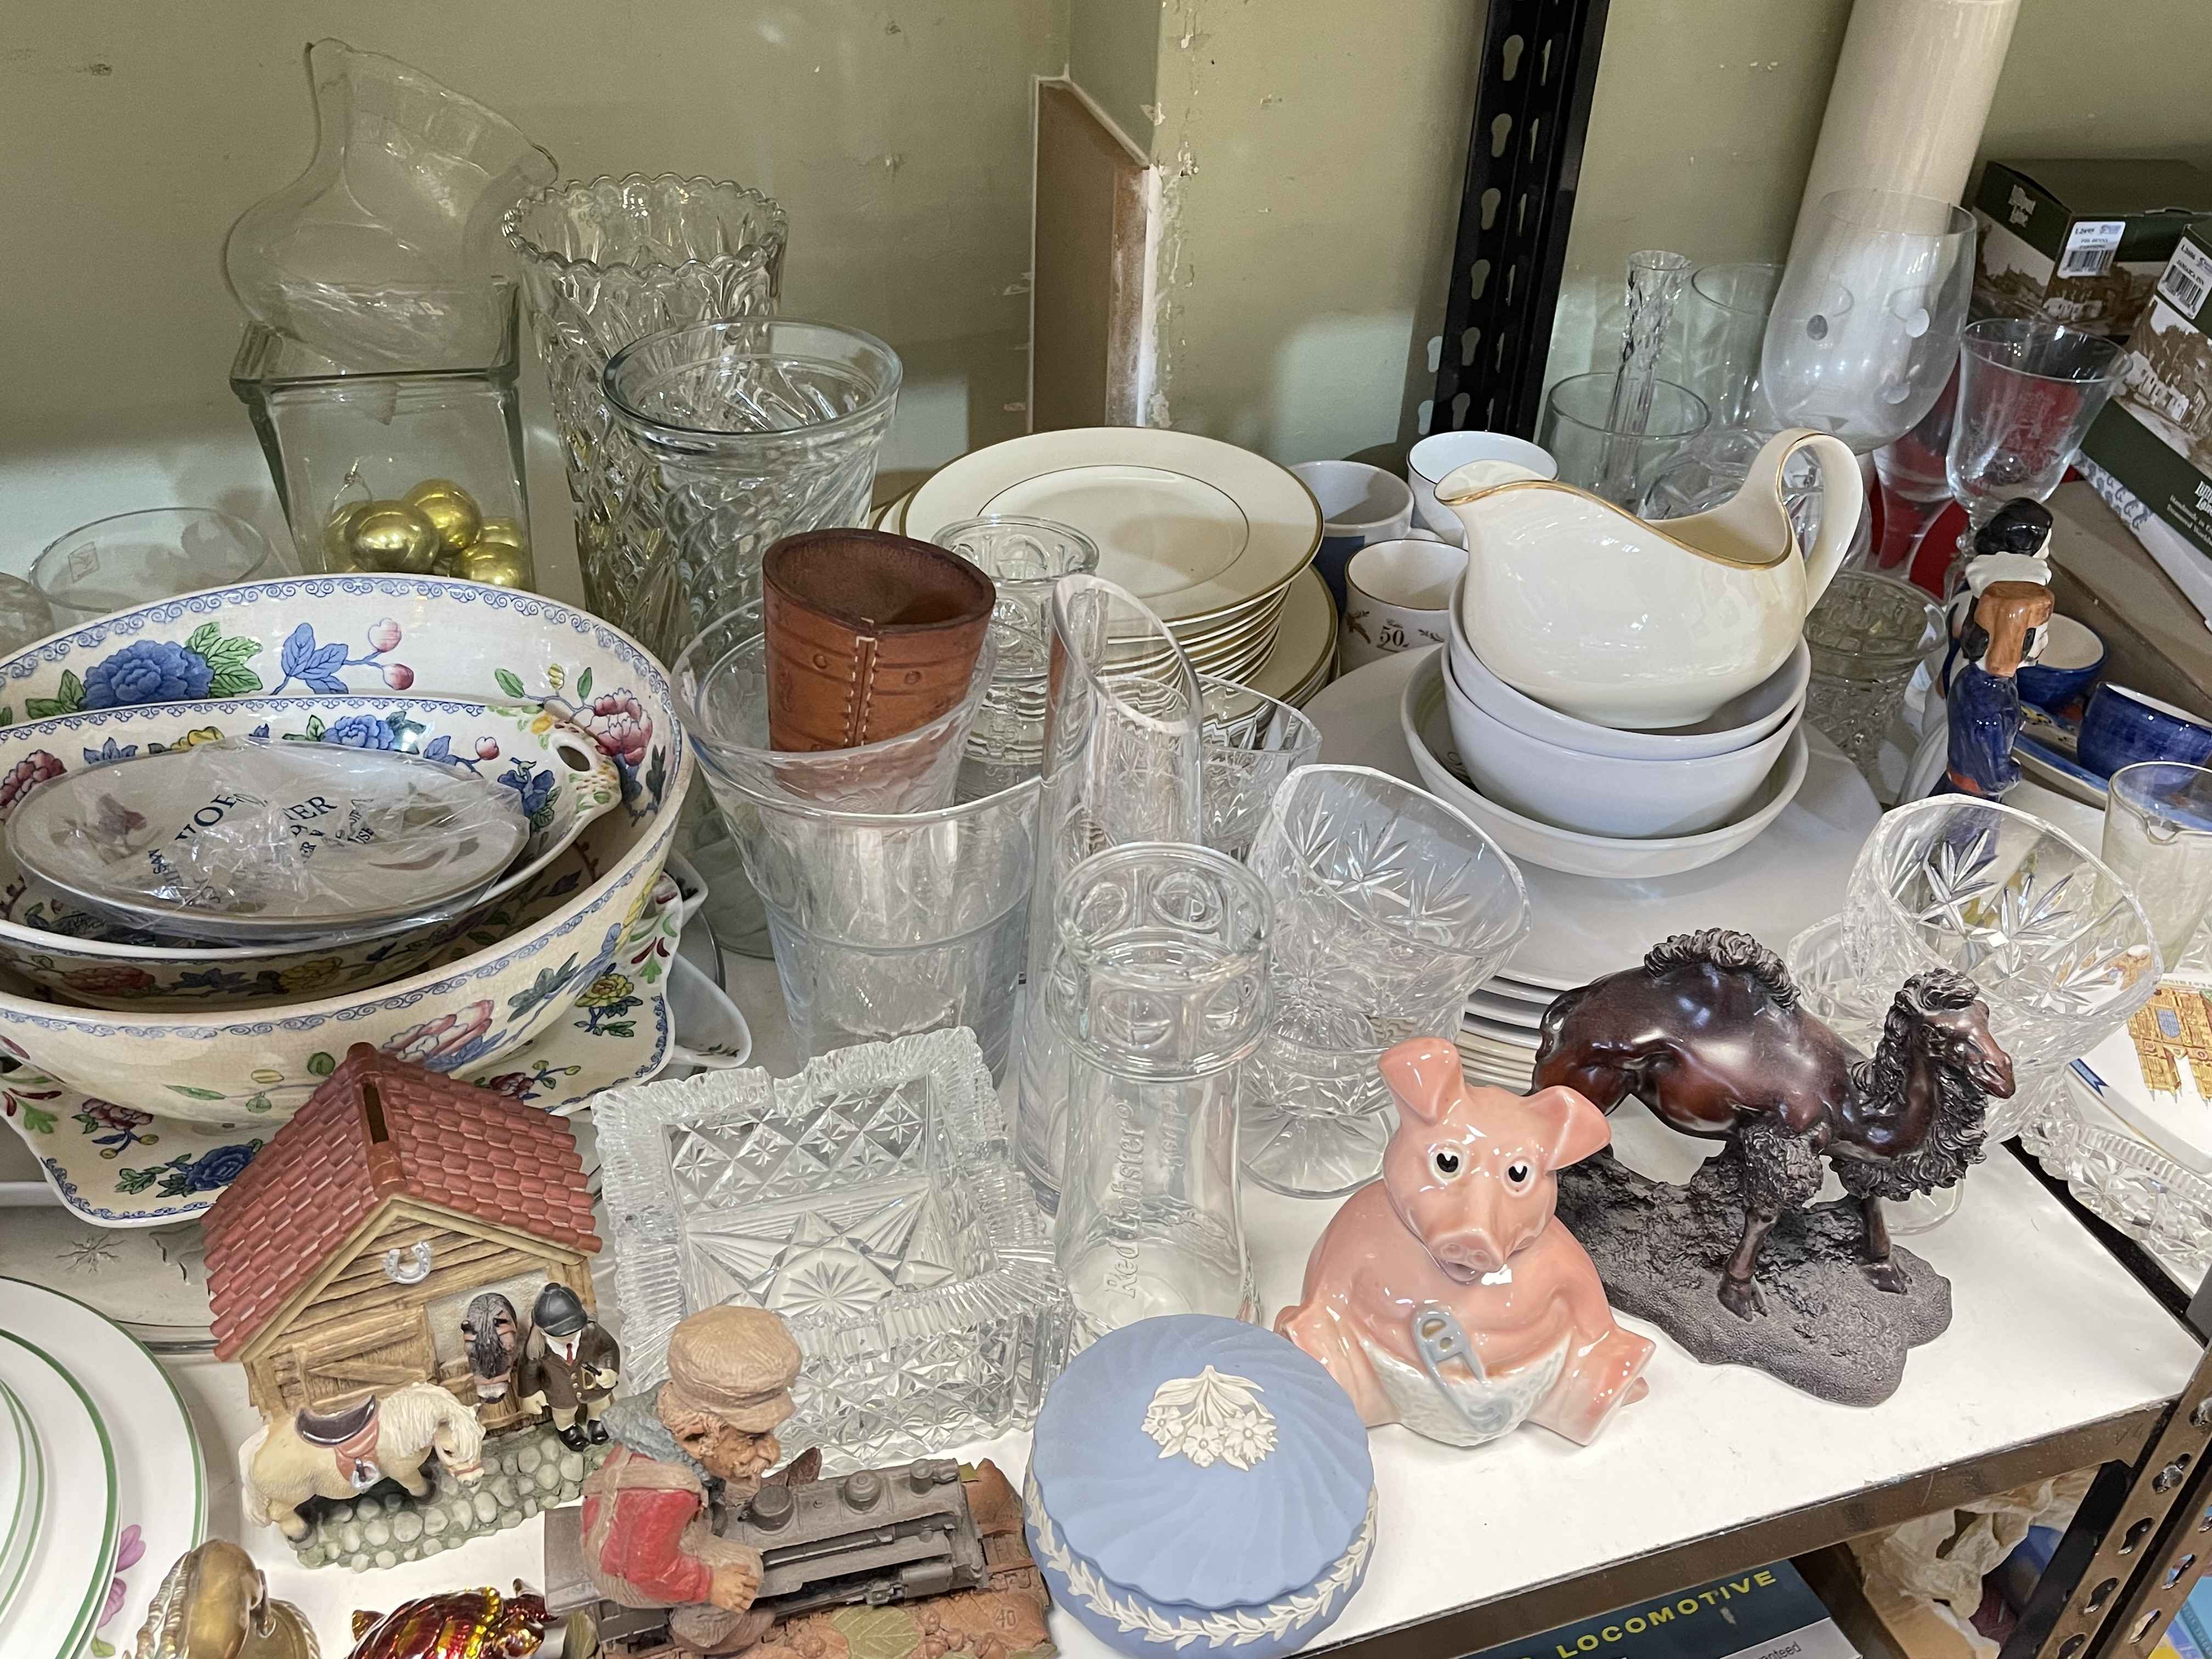 Large collection of china and glass including Lilliput Lane, Masons, Royal Doulton dinnerware. - Image 2 of 3